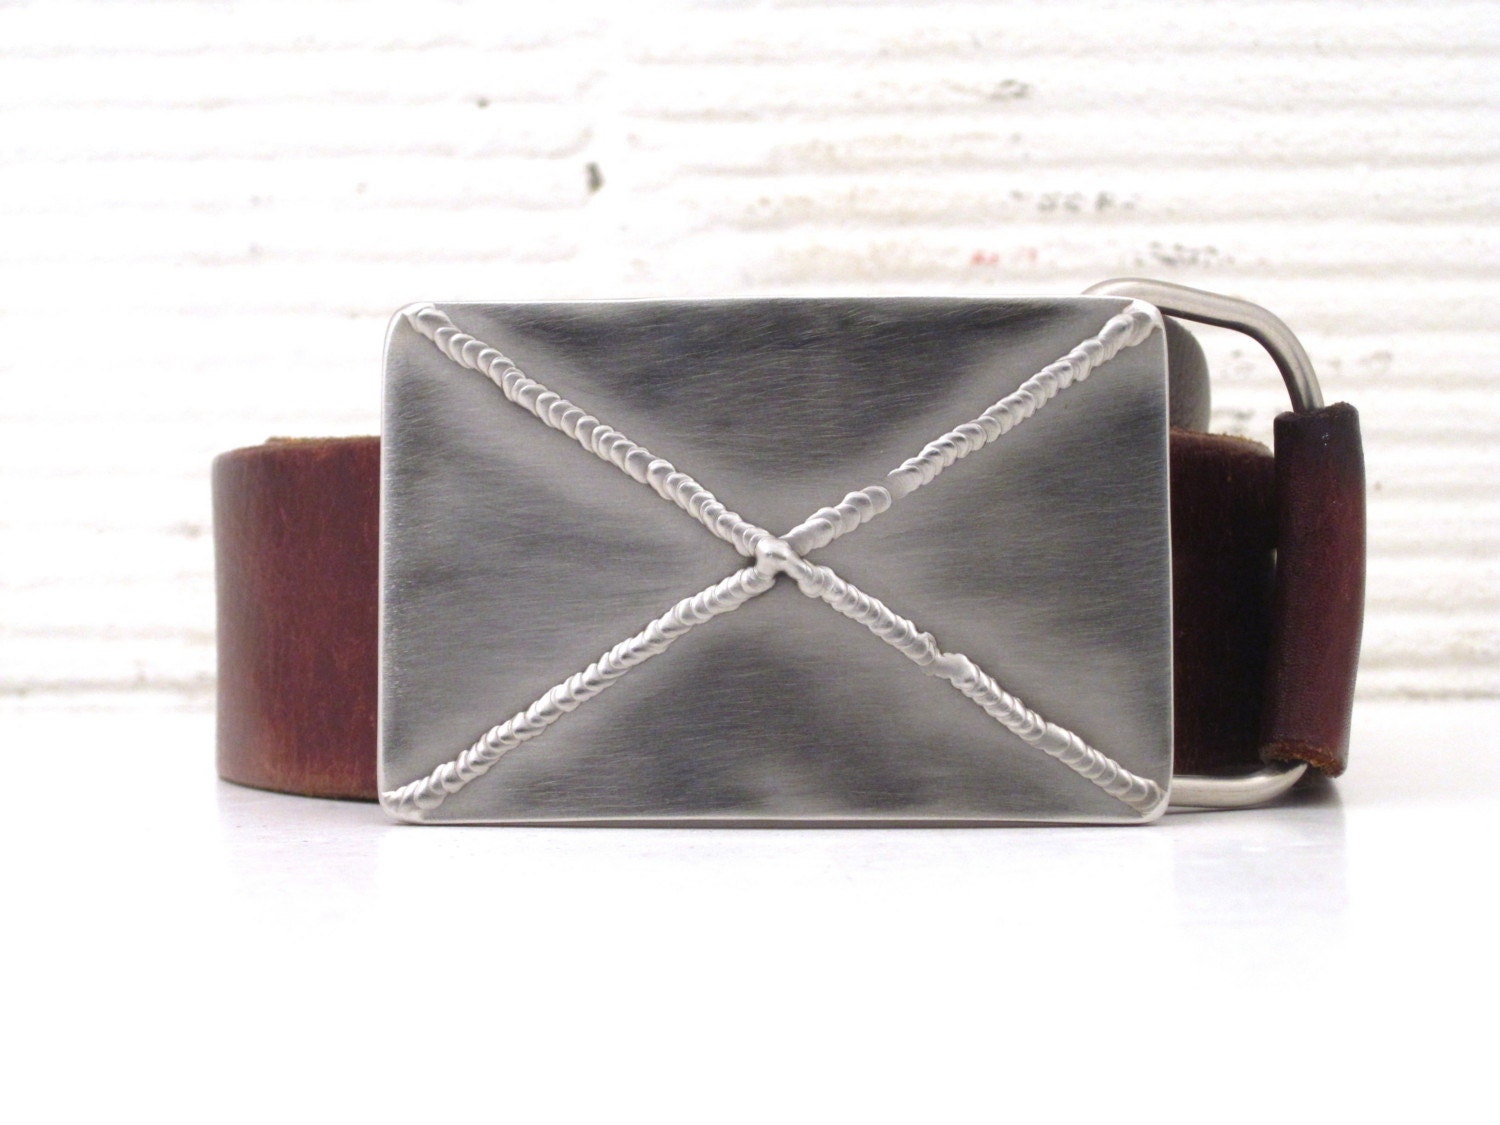 X marks the spot tig welded stainless belt buckle